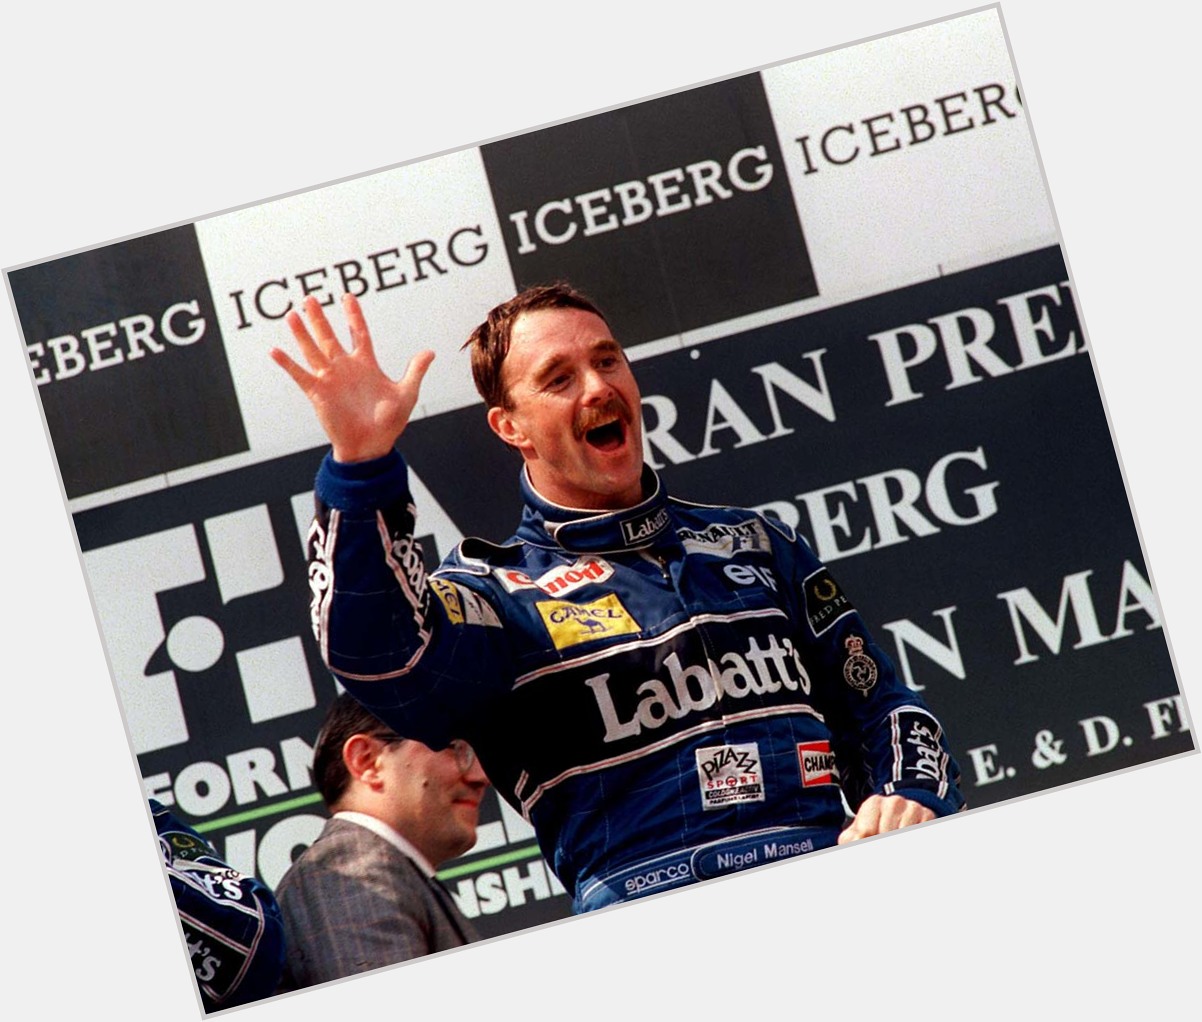 Happy birthday to the absolute legend that is Nigel Mansell! 